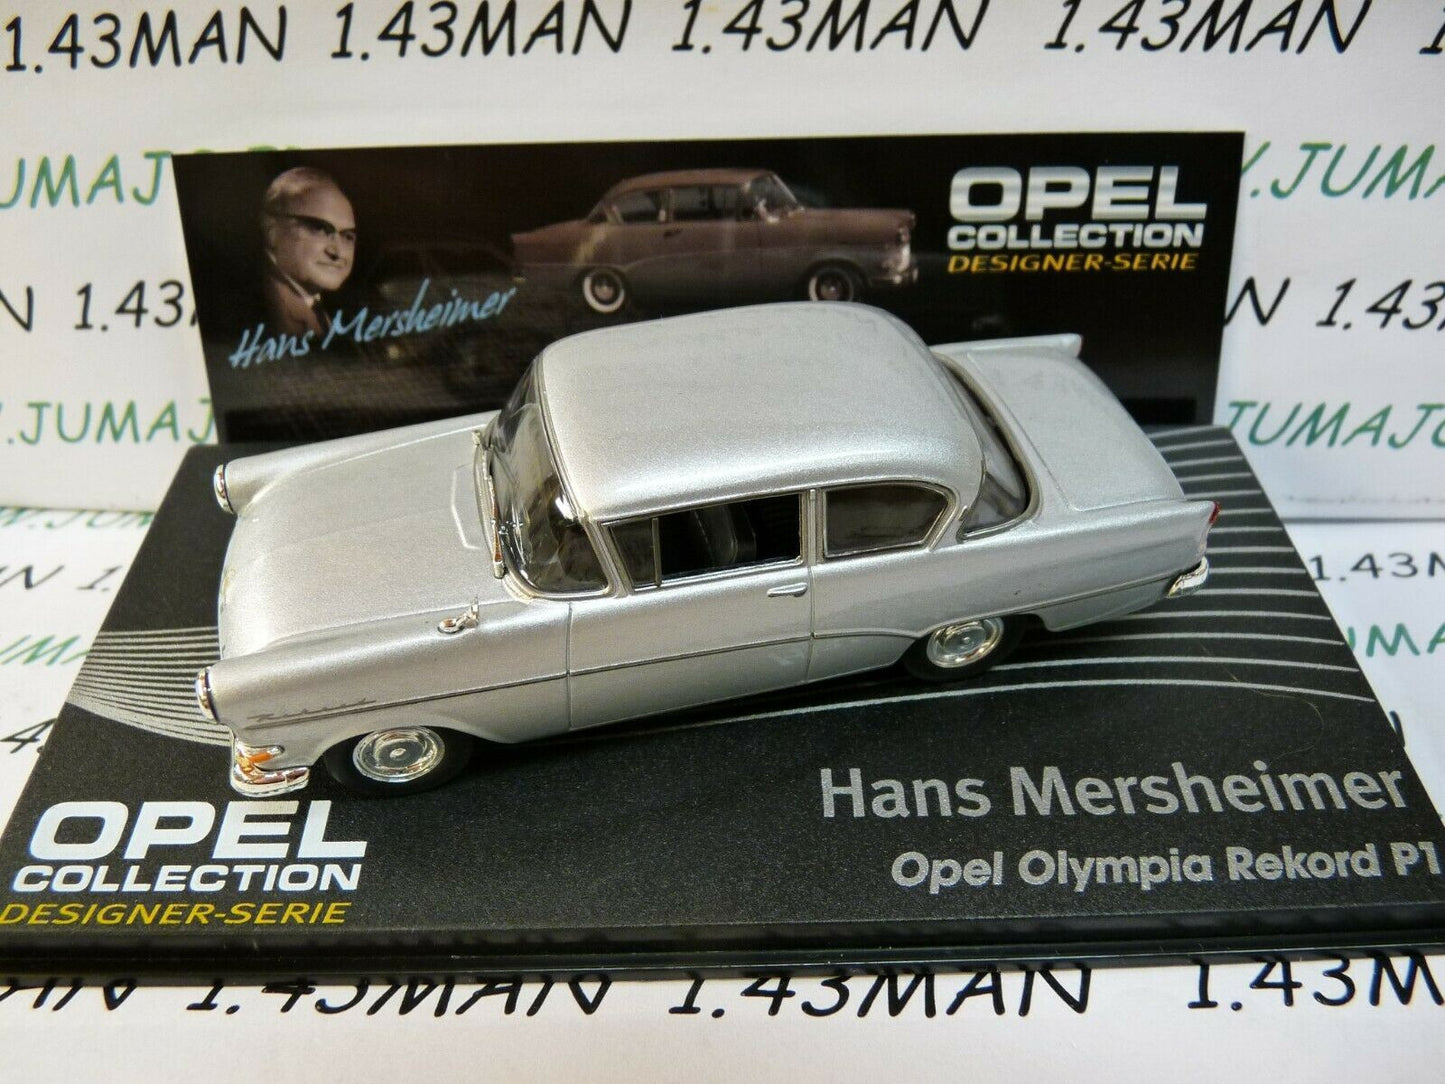 OPE123 voiture 1/43 IXO eagle moss OPEL collection Olypia Rekord P1 H.Mersheimer